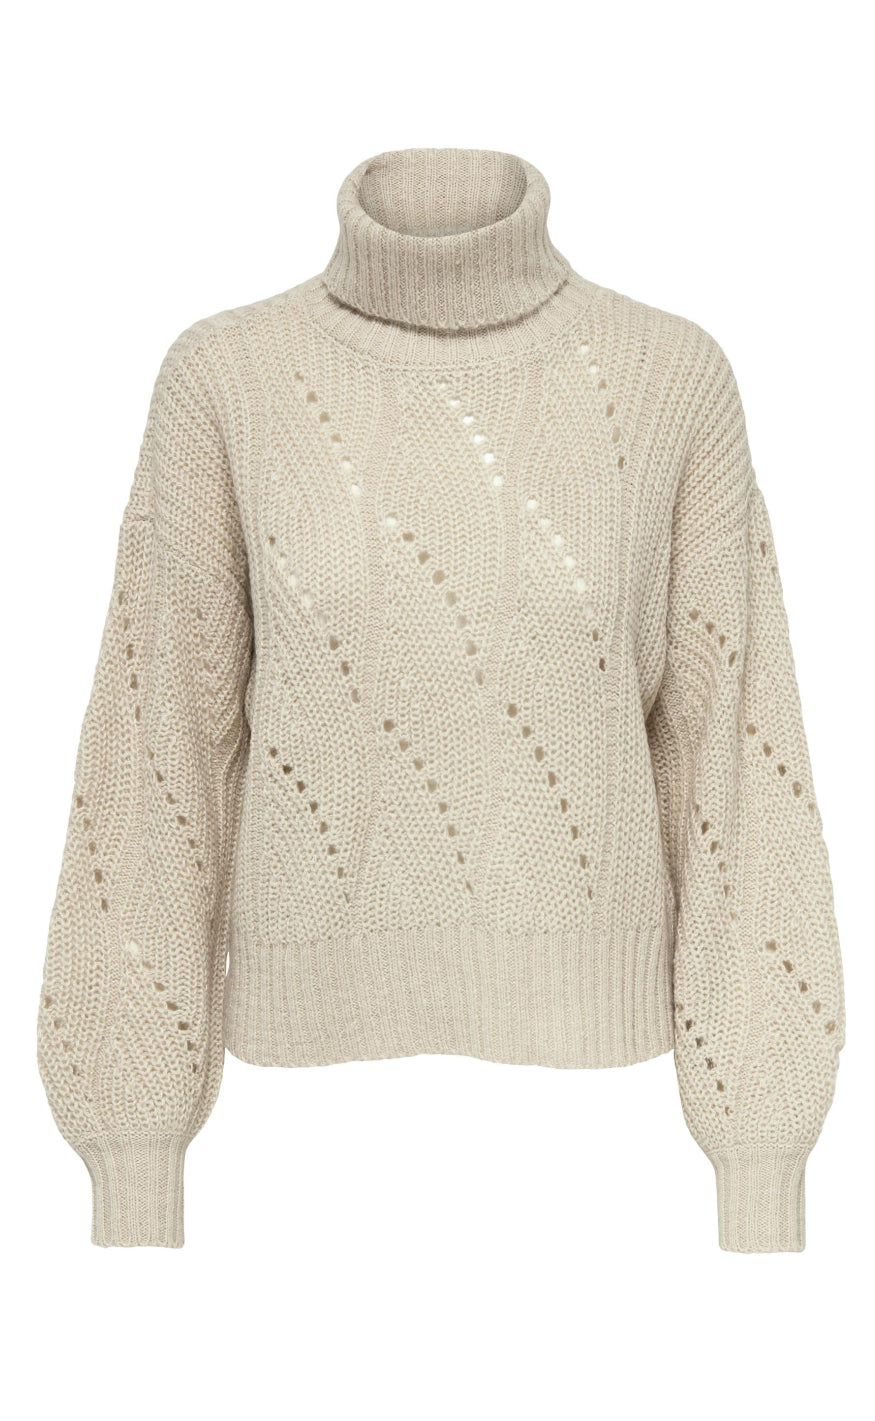 #2 - Only Sweater - Bea - Pumice Stone